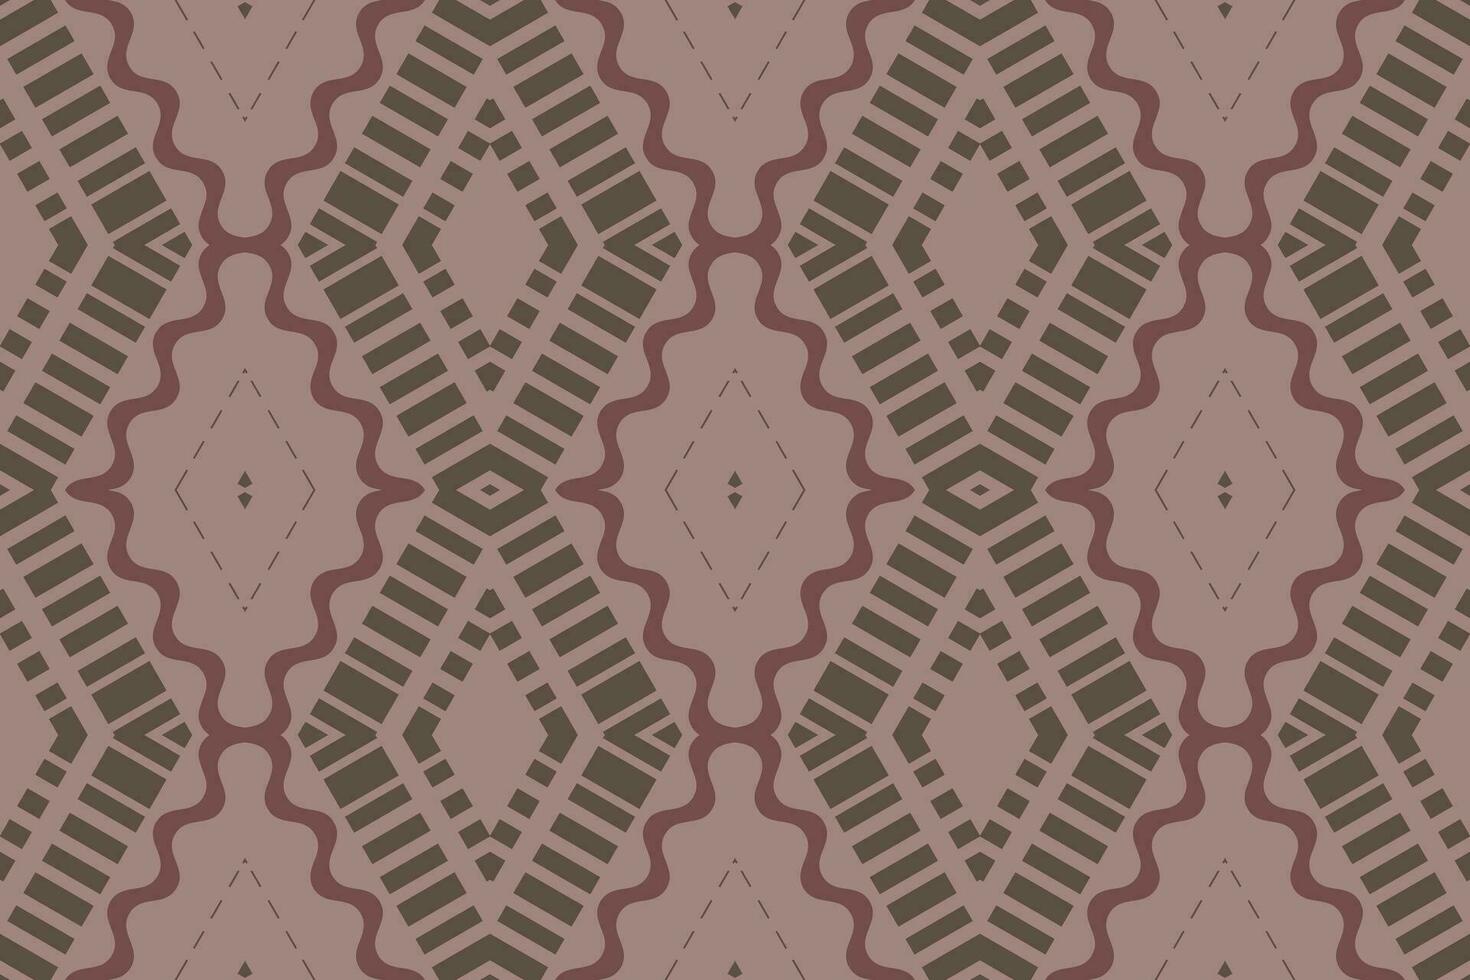 Ikat Floral Paisley Embroidery Background. Ikat Design Geometric Ethnic Oriental Pattern Traditional. Ikat Aztec Style Abstract Design for Print Texture,fabric,saree,sari,carpet. vector